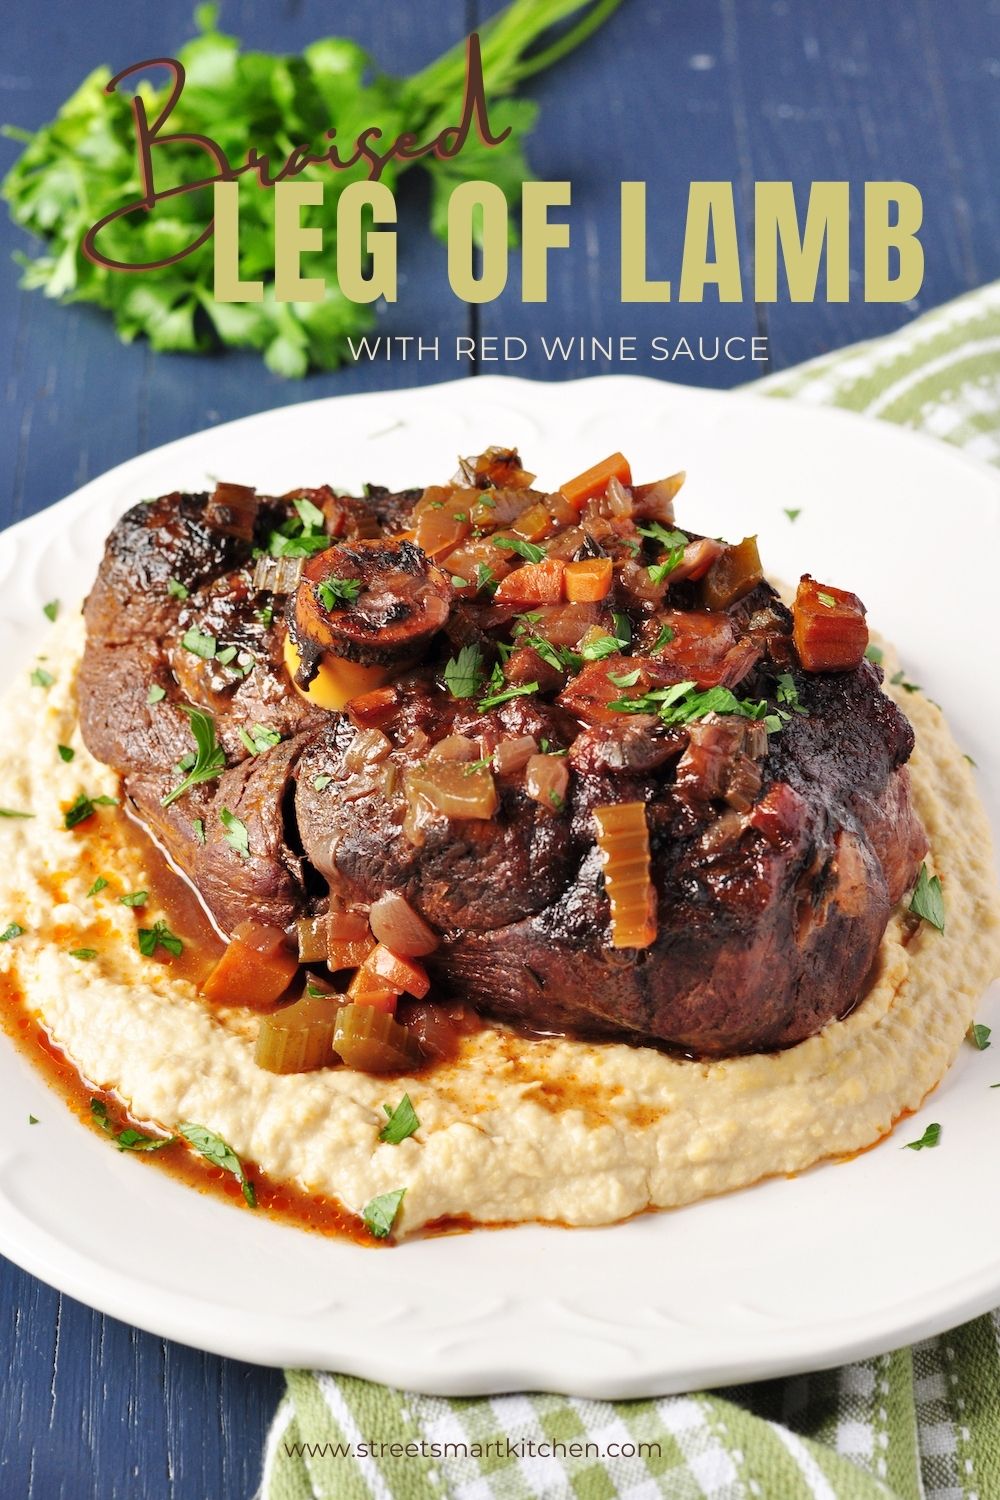 Braised Leg of Lamb with Red Wine Sauce